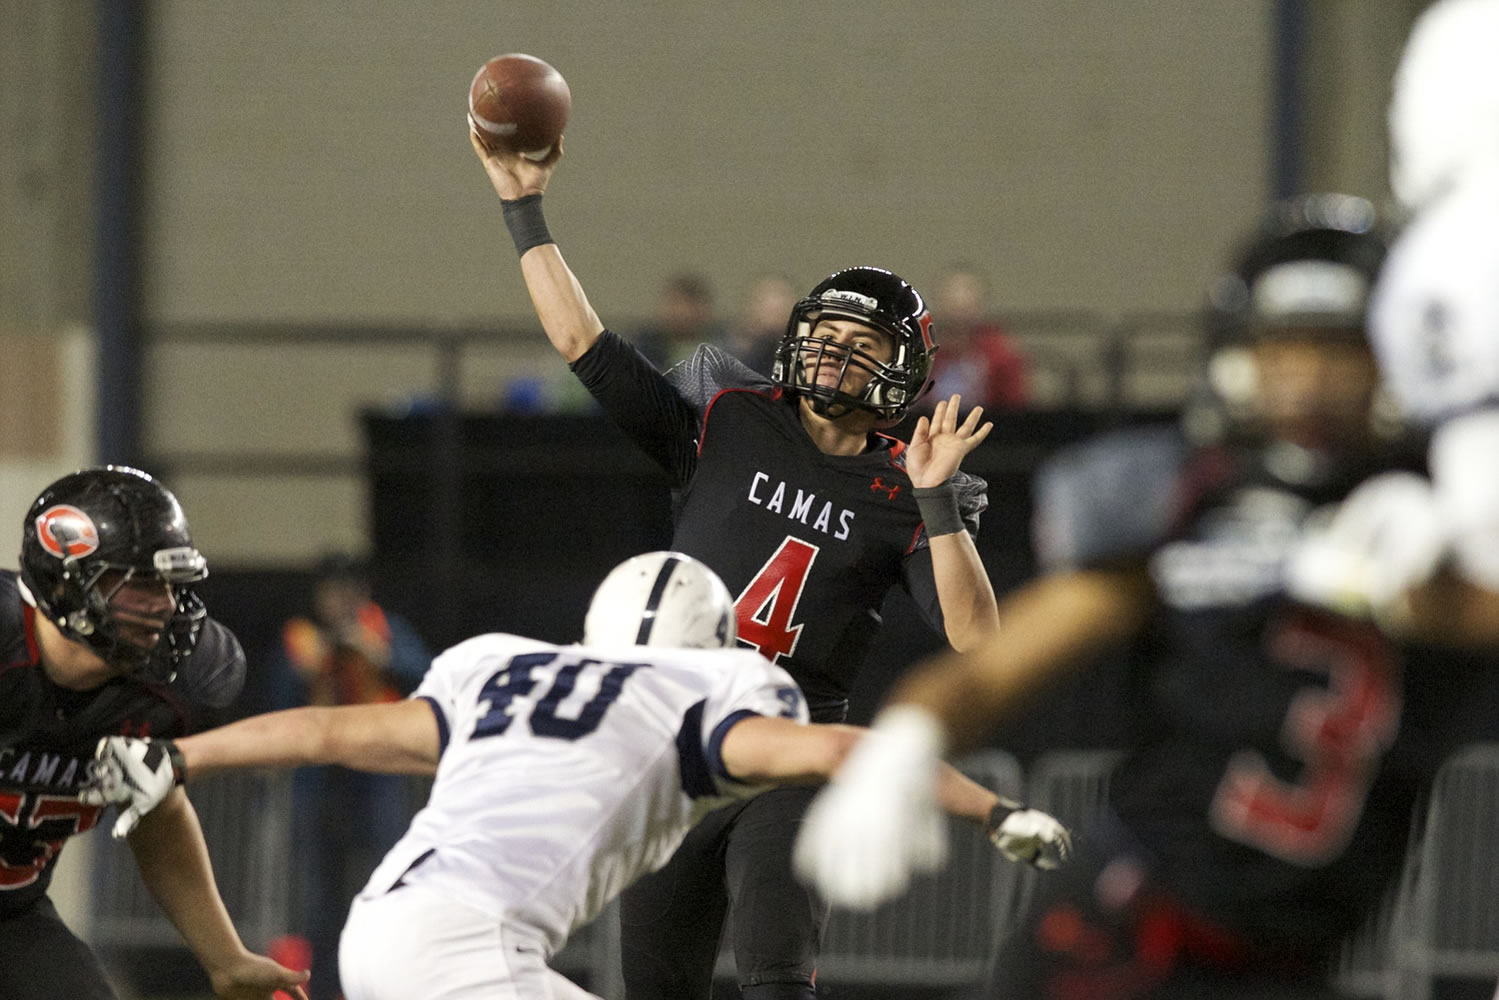 Camas quarterback Reilly Hennessey passes against Chiawana. Chiawana scores on the final play of the game to beat Camas 27-26, winning the State 4A football championship at the Tacoma Dome, Saturday, December 7, 2013.